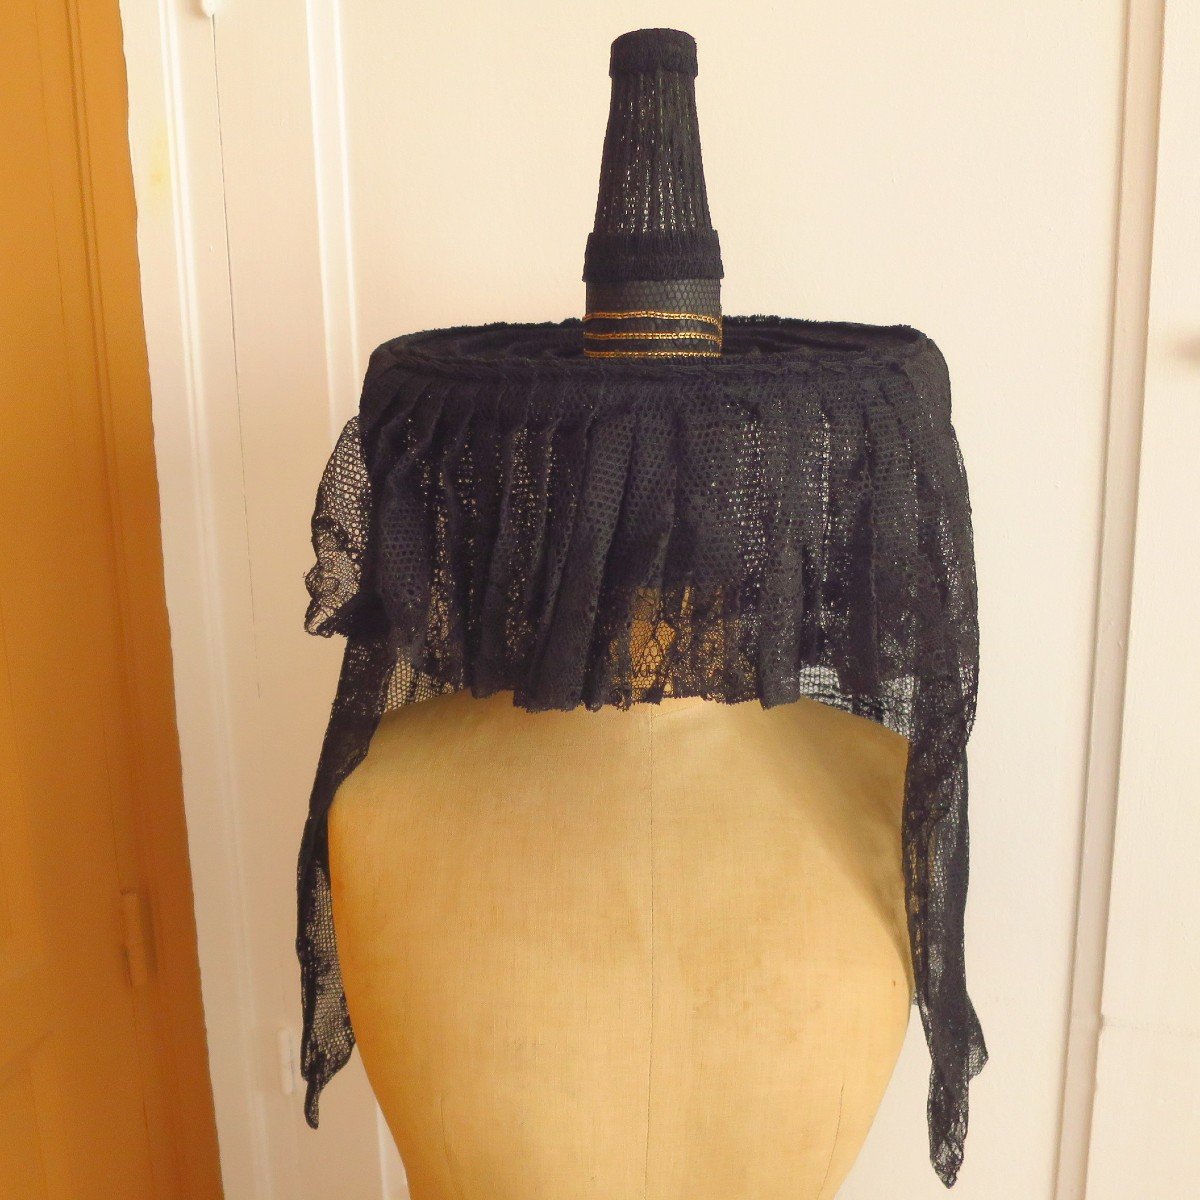 Bressane Headdress In Black Lace, Second Half Of The Nineteenth